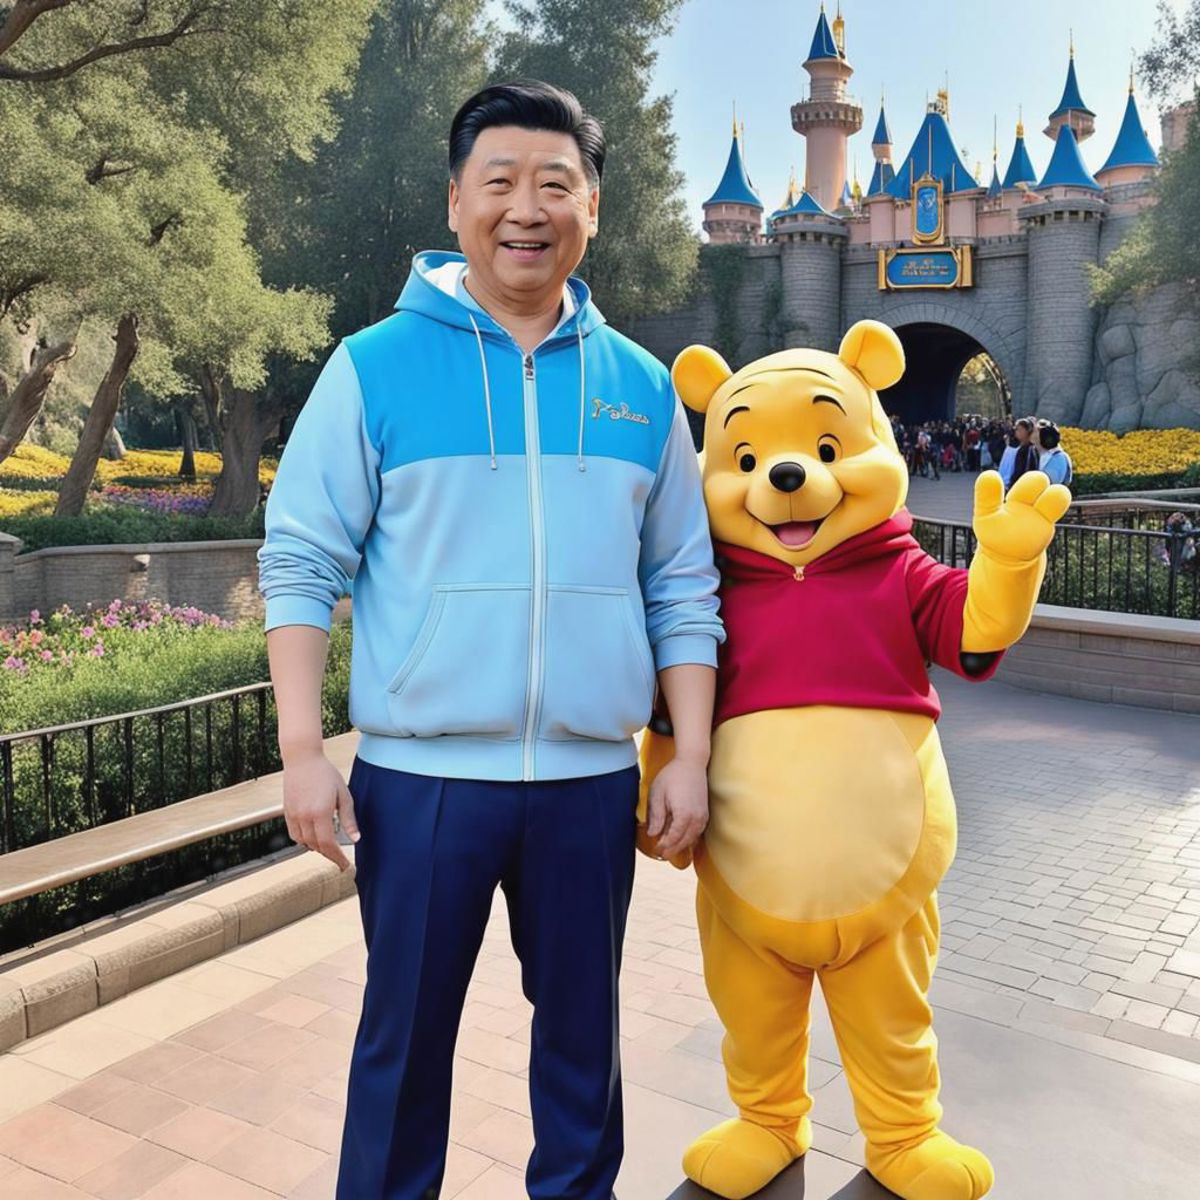 Man posing next to a Winnie the Pooh character in front of a castle.